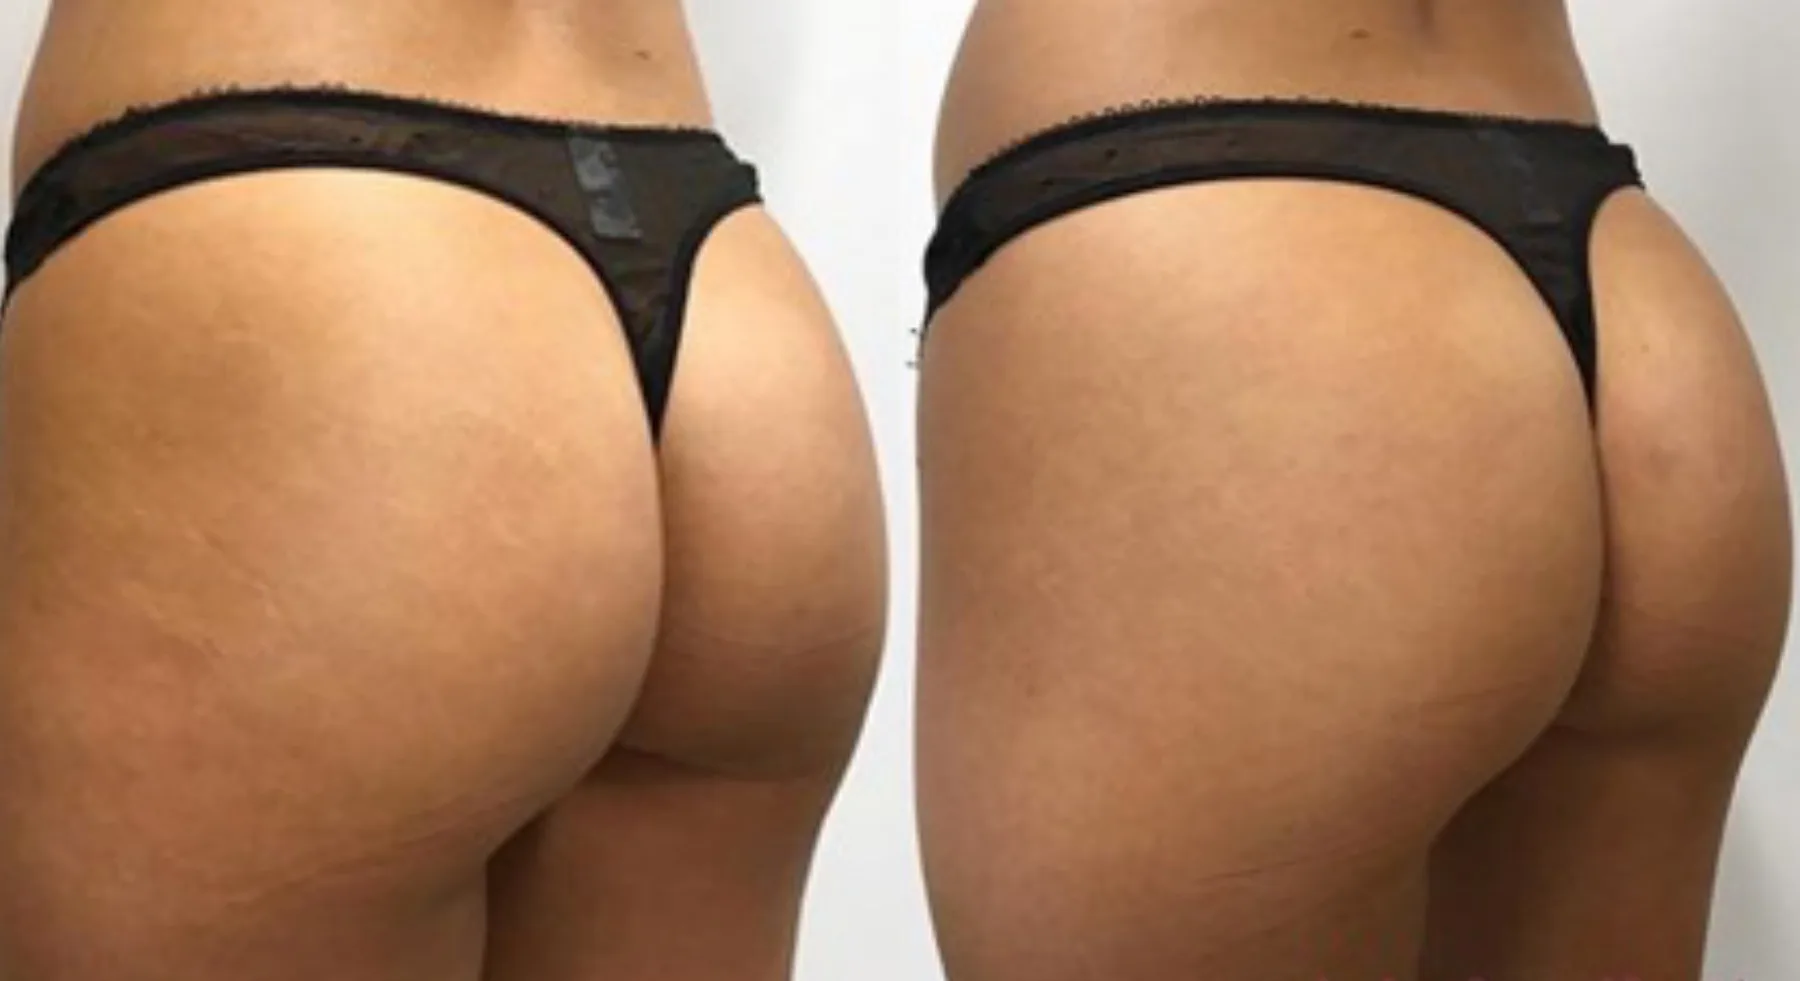 Sculptra Butt Lift Before and After Photos | Revive Med Spa In San Diego, CA